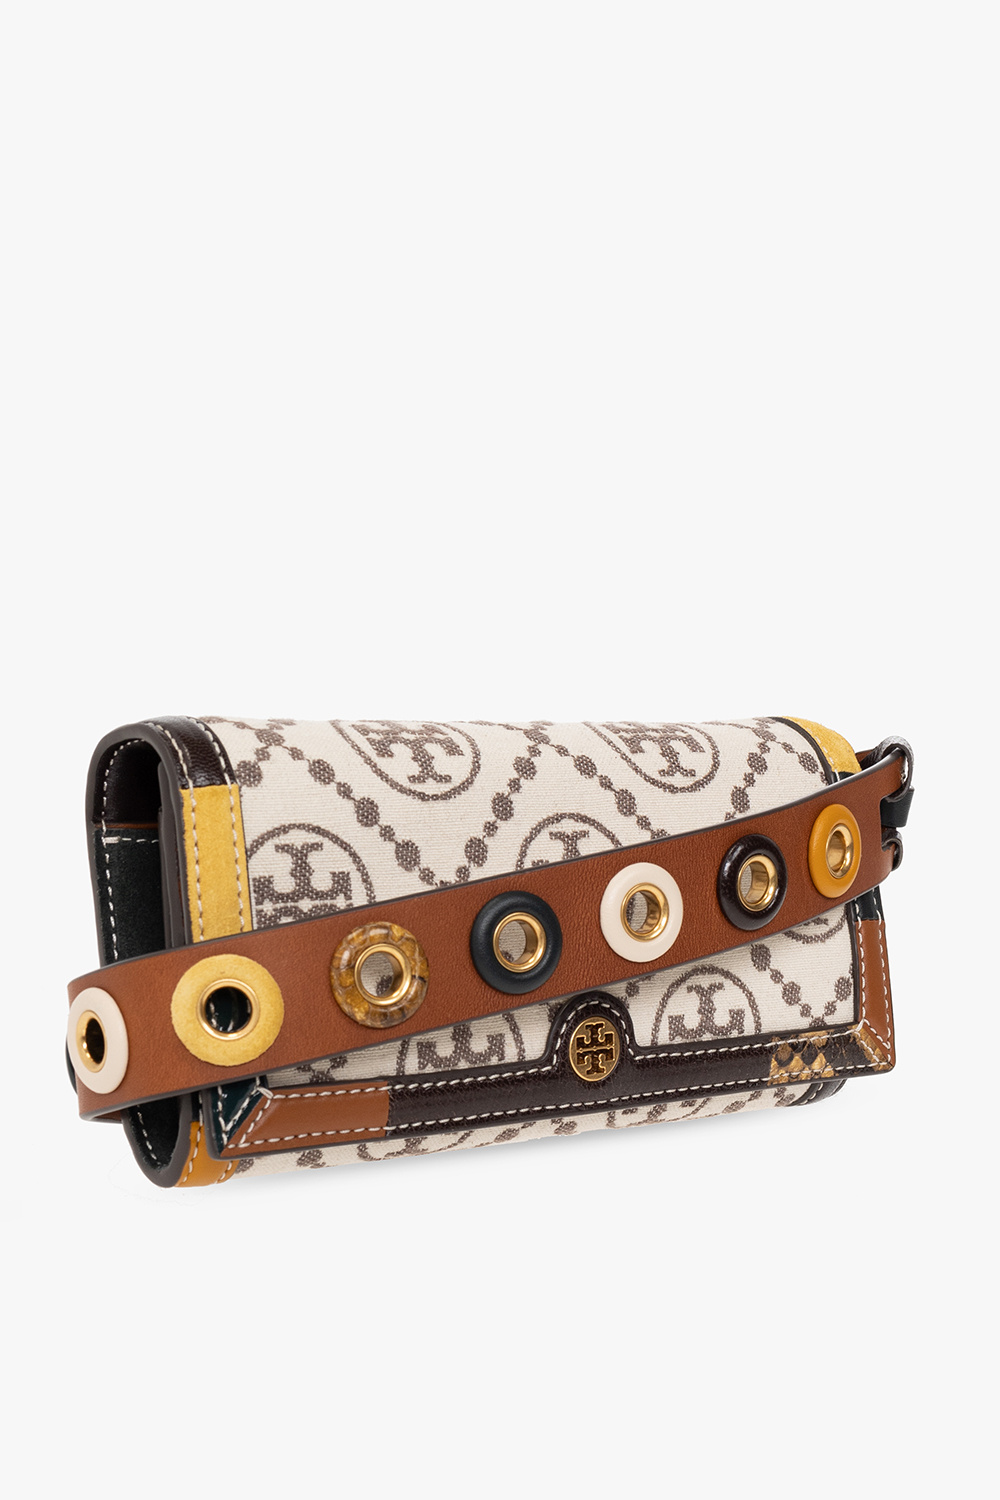 Tory Burch ‘T Monogram’ wallet with strap